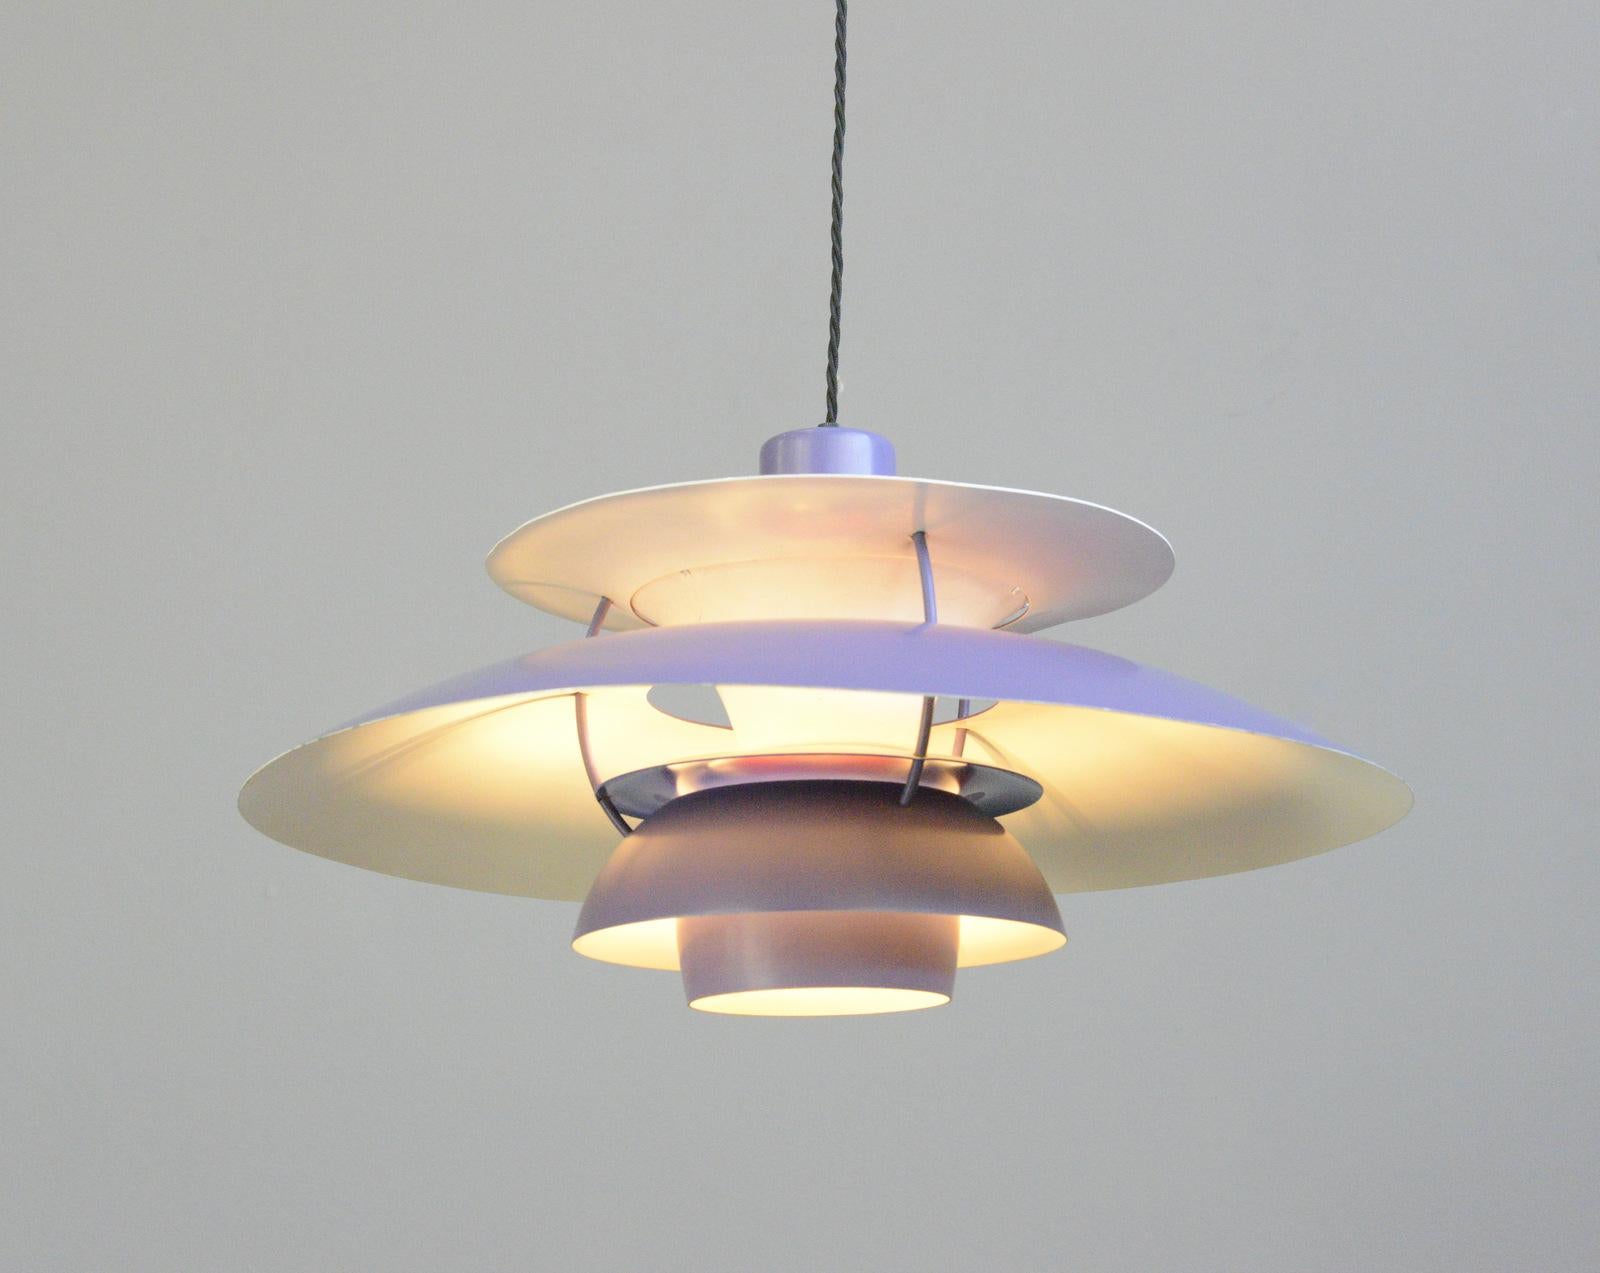 Purple Model PH5 pendant lights by Louis Poulson Circa 1960s

- Comes with 150cm of cable
- Takes E27 fitting bulbs
- Purple with red details
- Made from aluminium
- Designed by Poul Henningsen
- Made by Louis Poulson
- Model PH5
- Danish ~